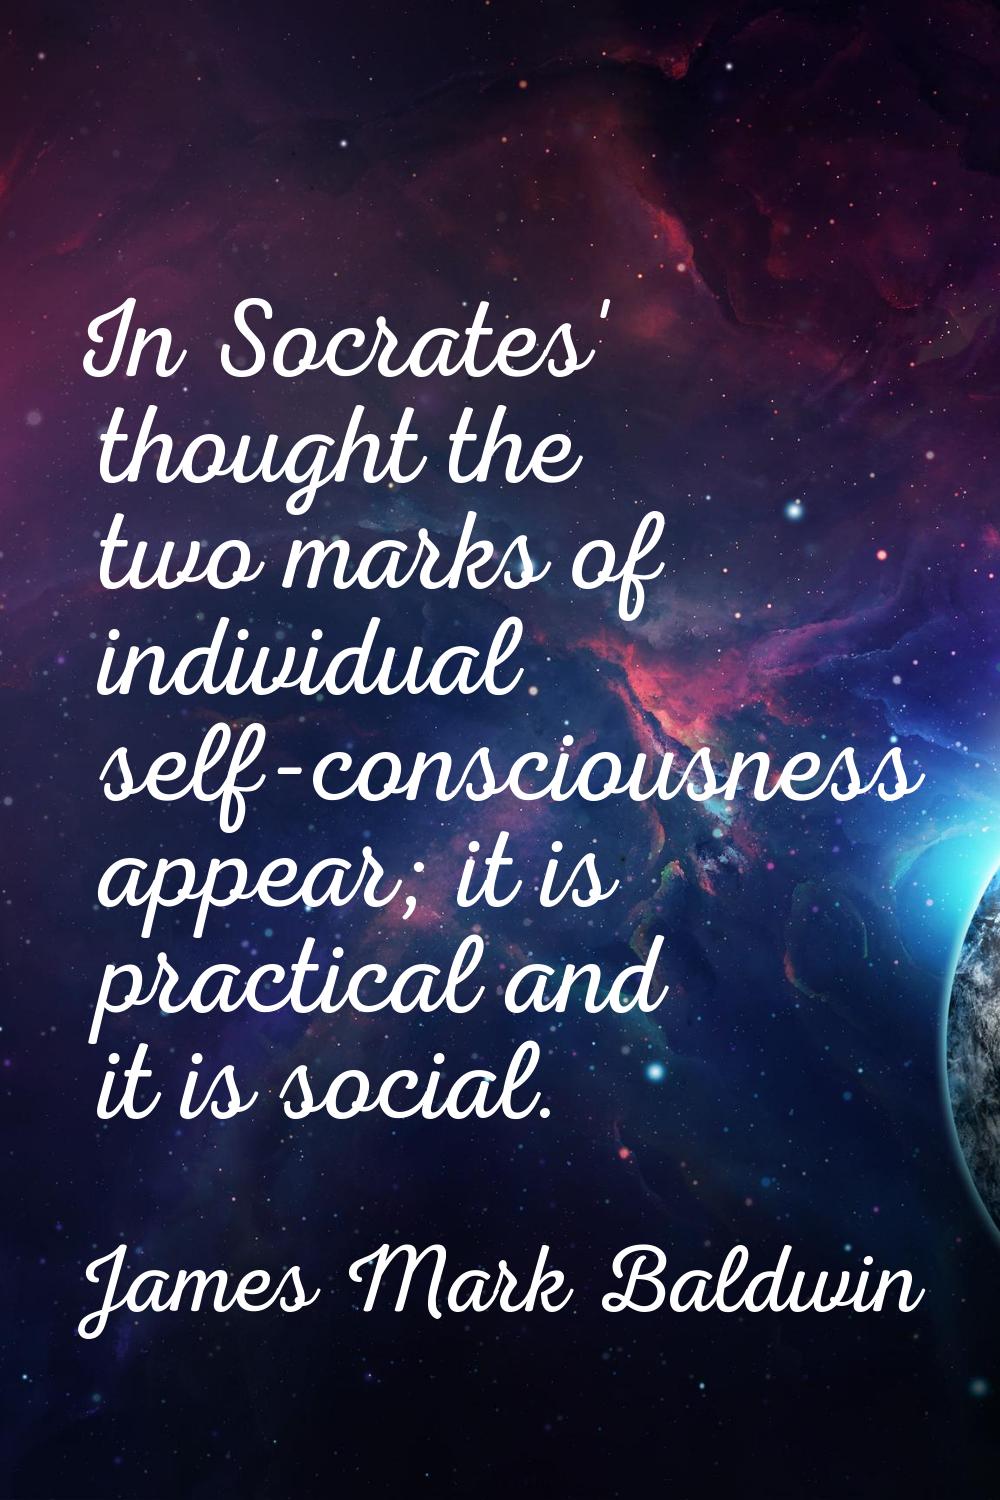 In Socrates' thought the two marks of individual self-consciousness appear; it is practical and it 